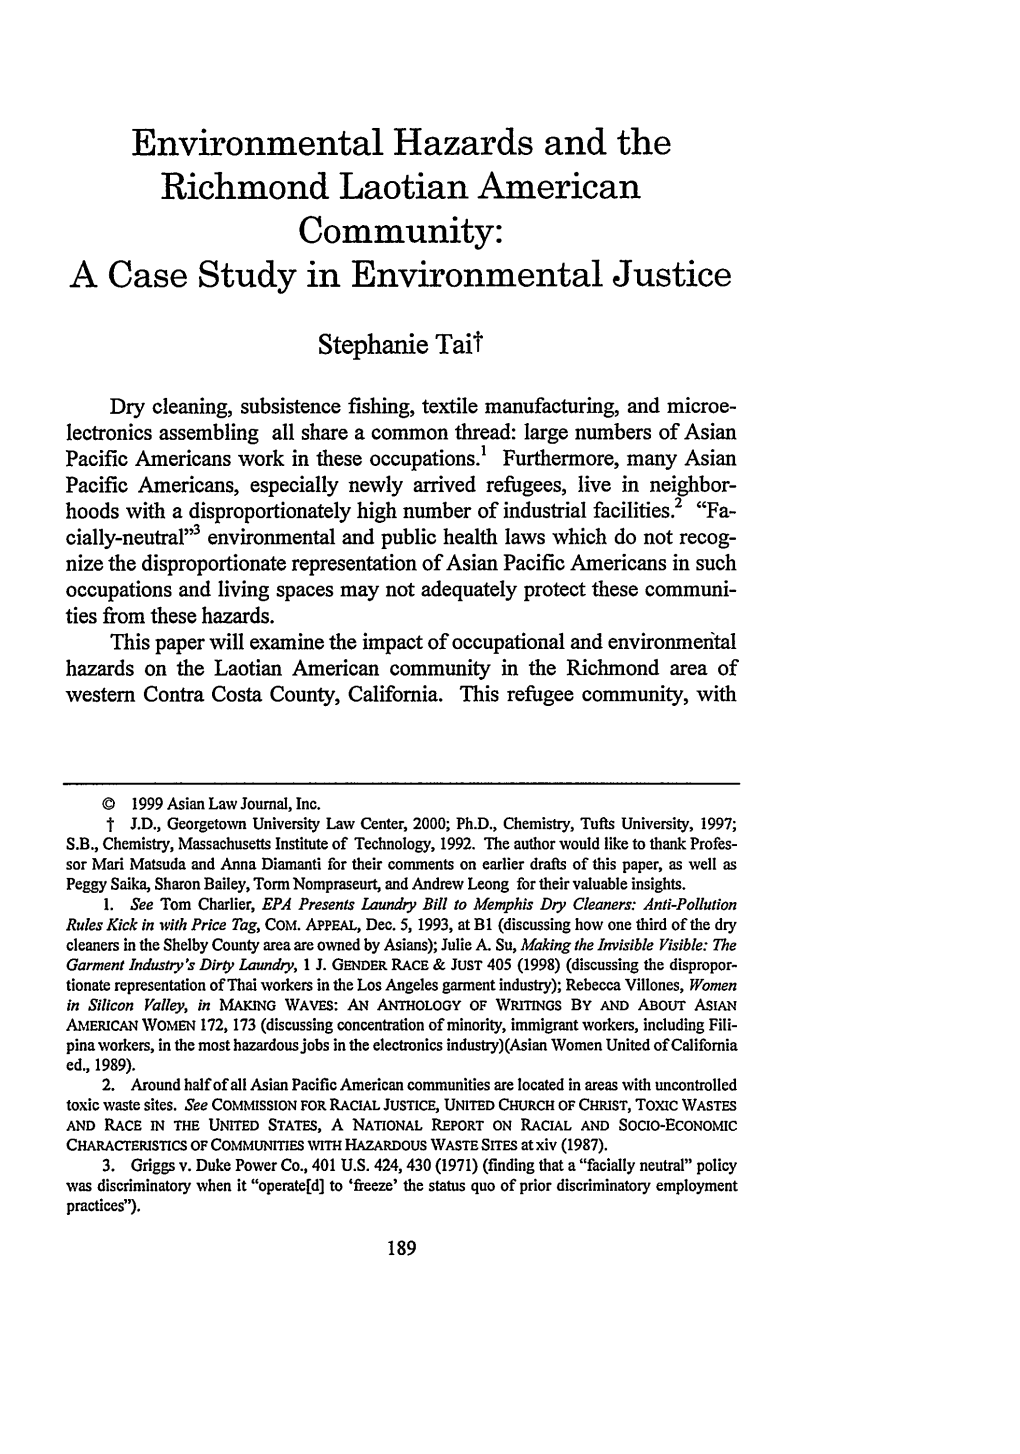 Environmental Hazards and the Richmond Laotian American Community: a Case Study in Environmental Justice